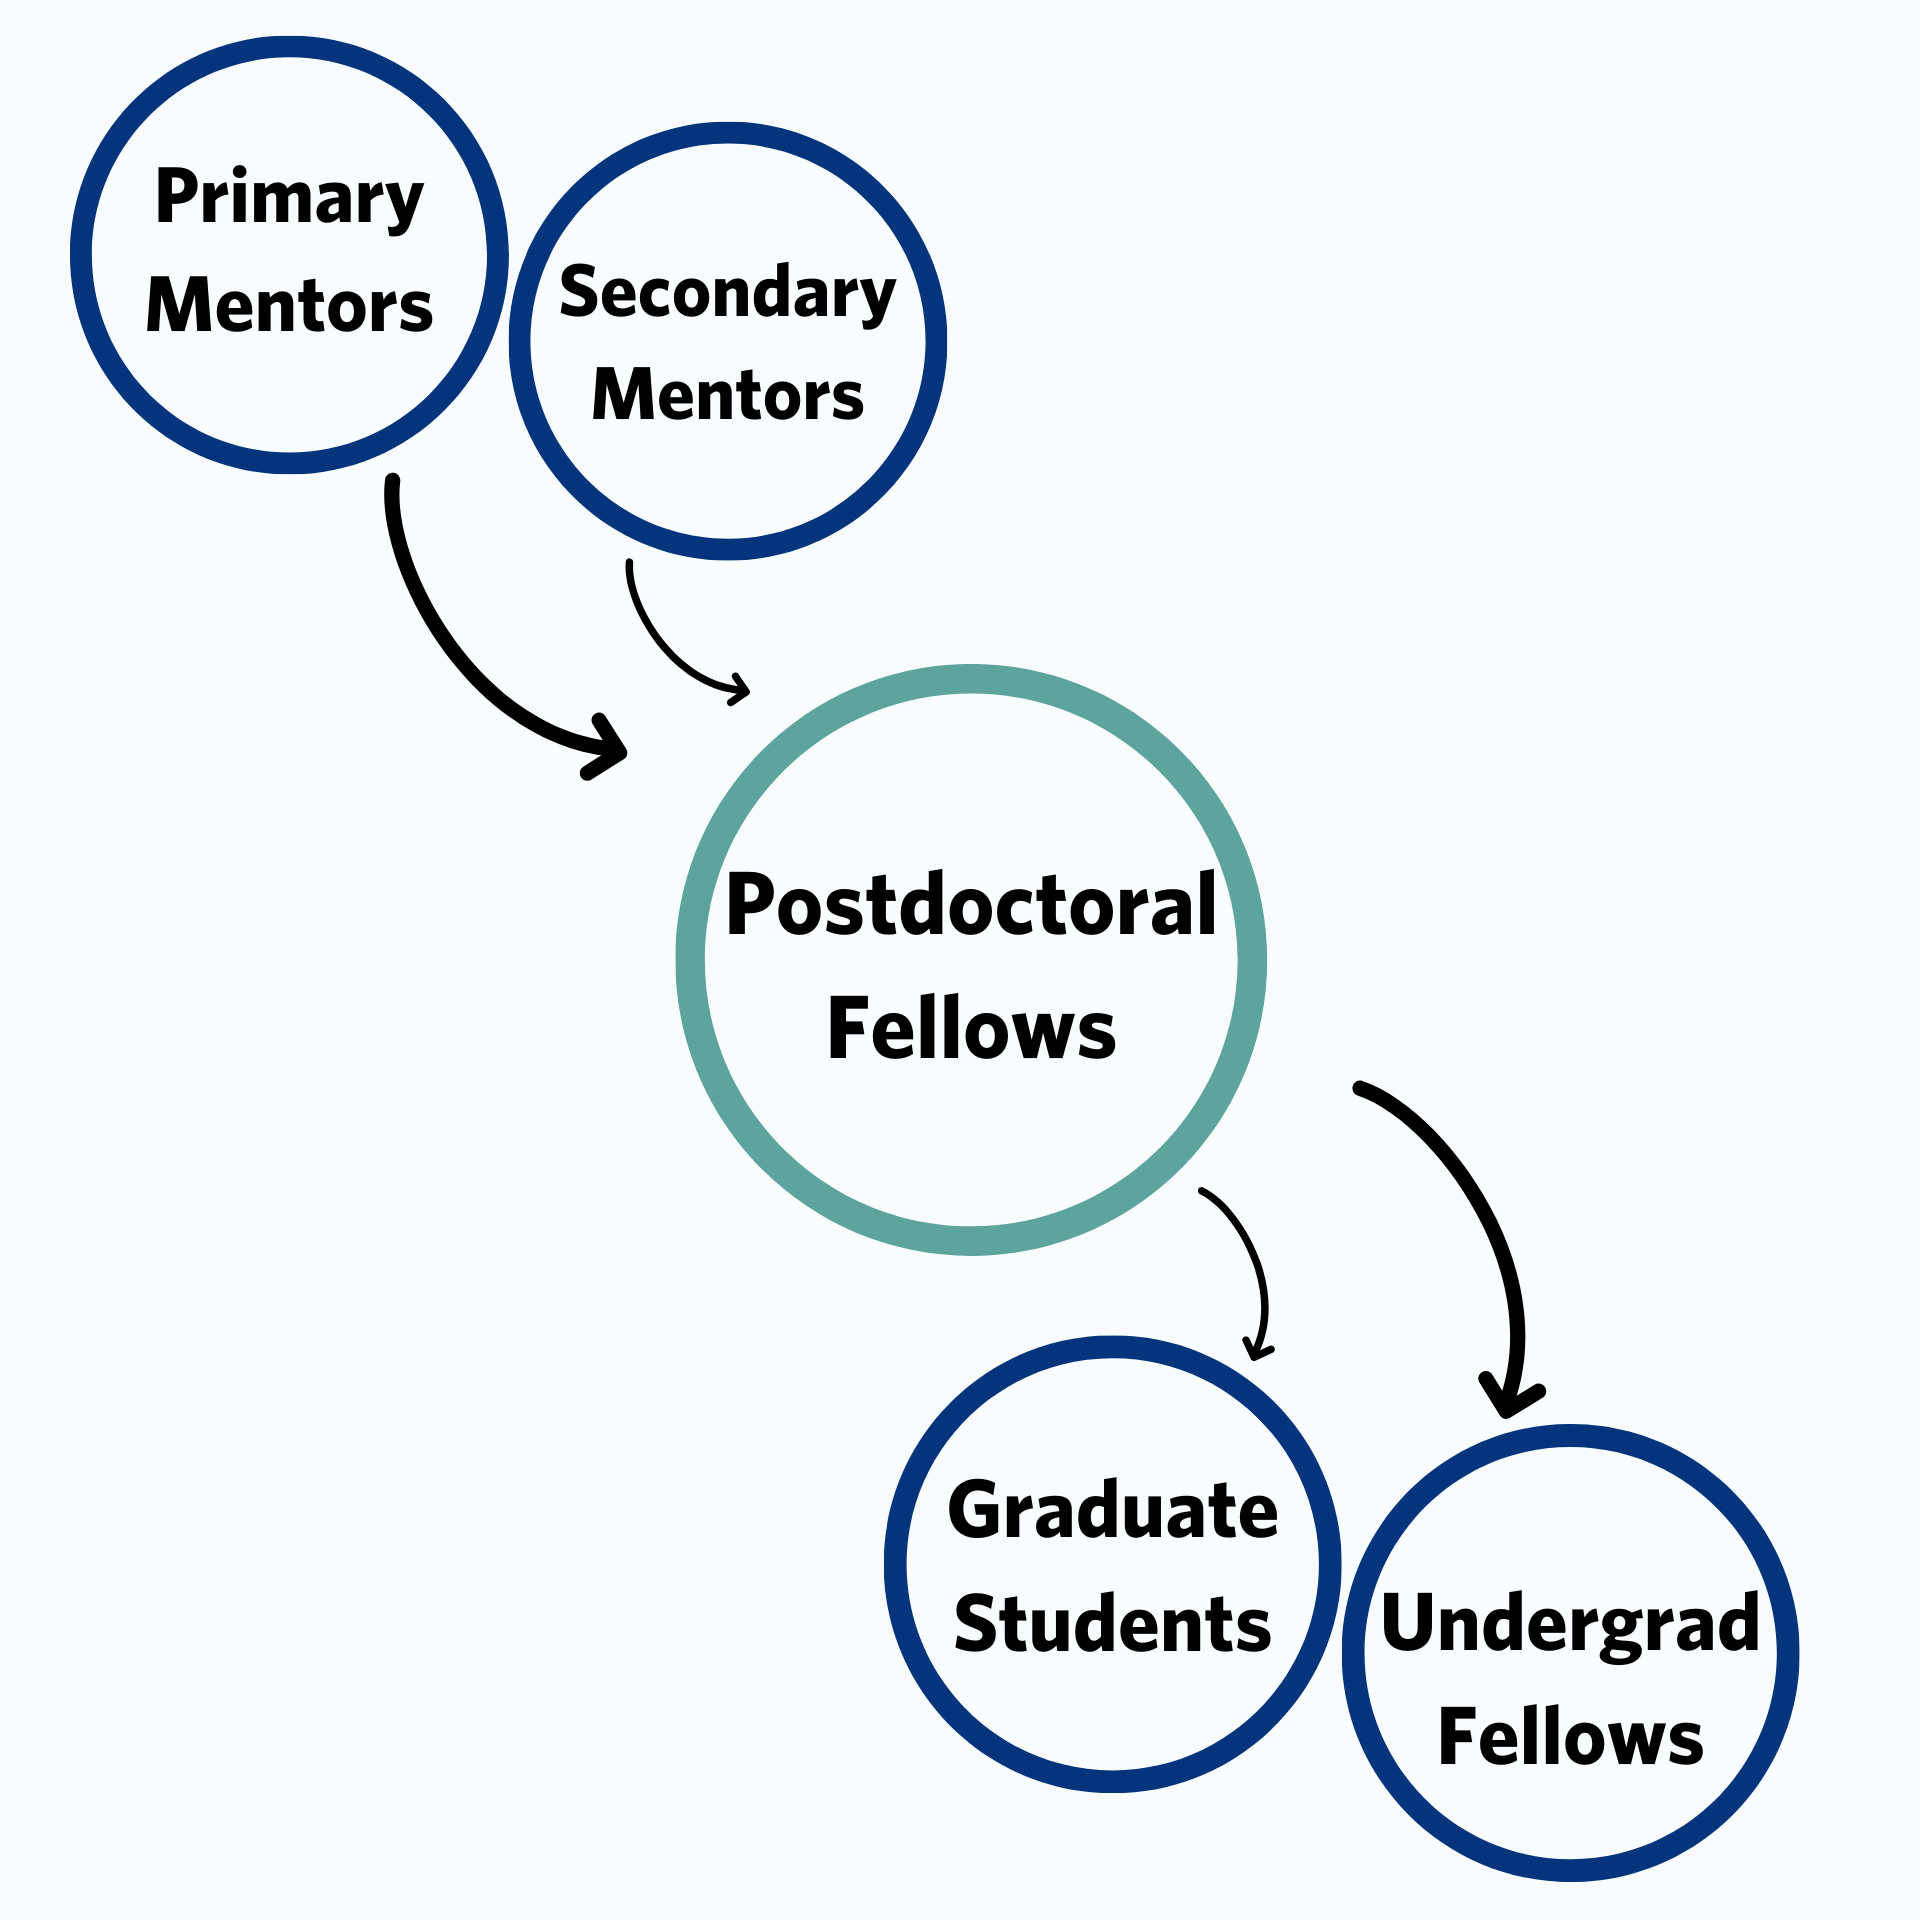 Visual illustrating Primary and secondary mentors pointing to the postdoctoral fellows and postdoctoral fellows pointing to graduate students and undergrad fellows